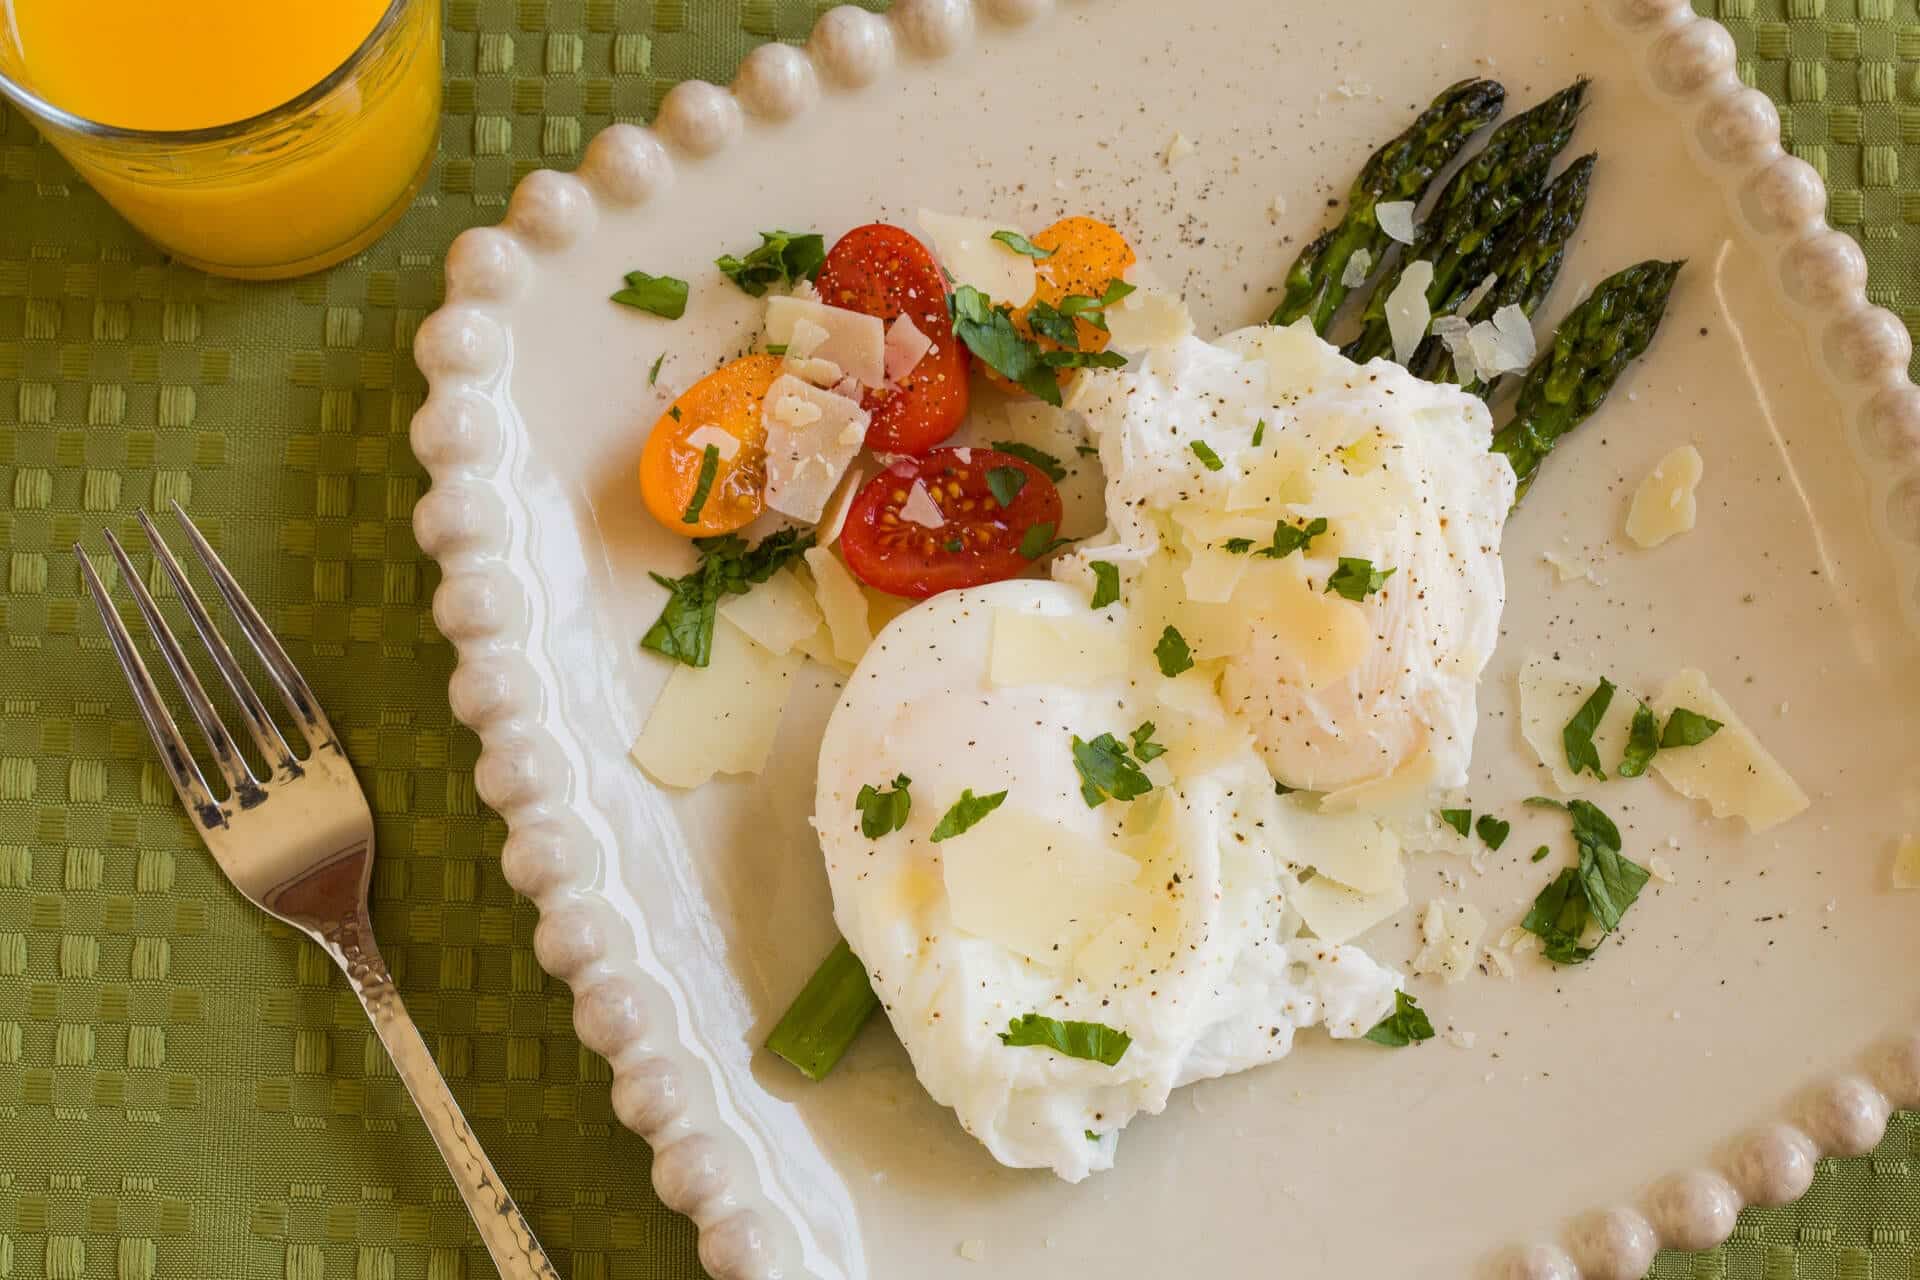 Poached eggs with vegetables and a glass of orange juice